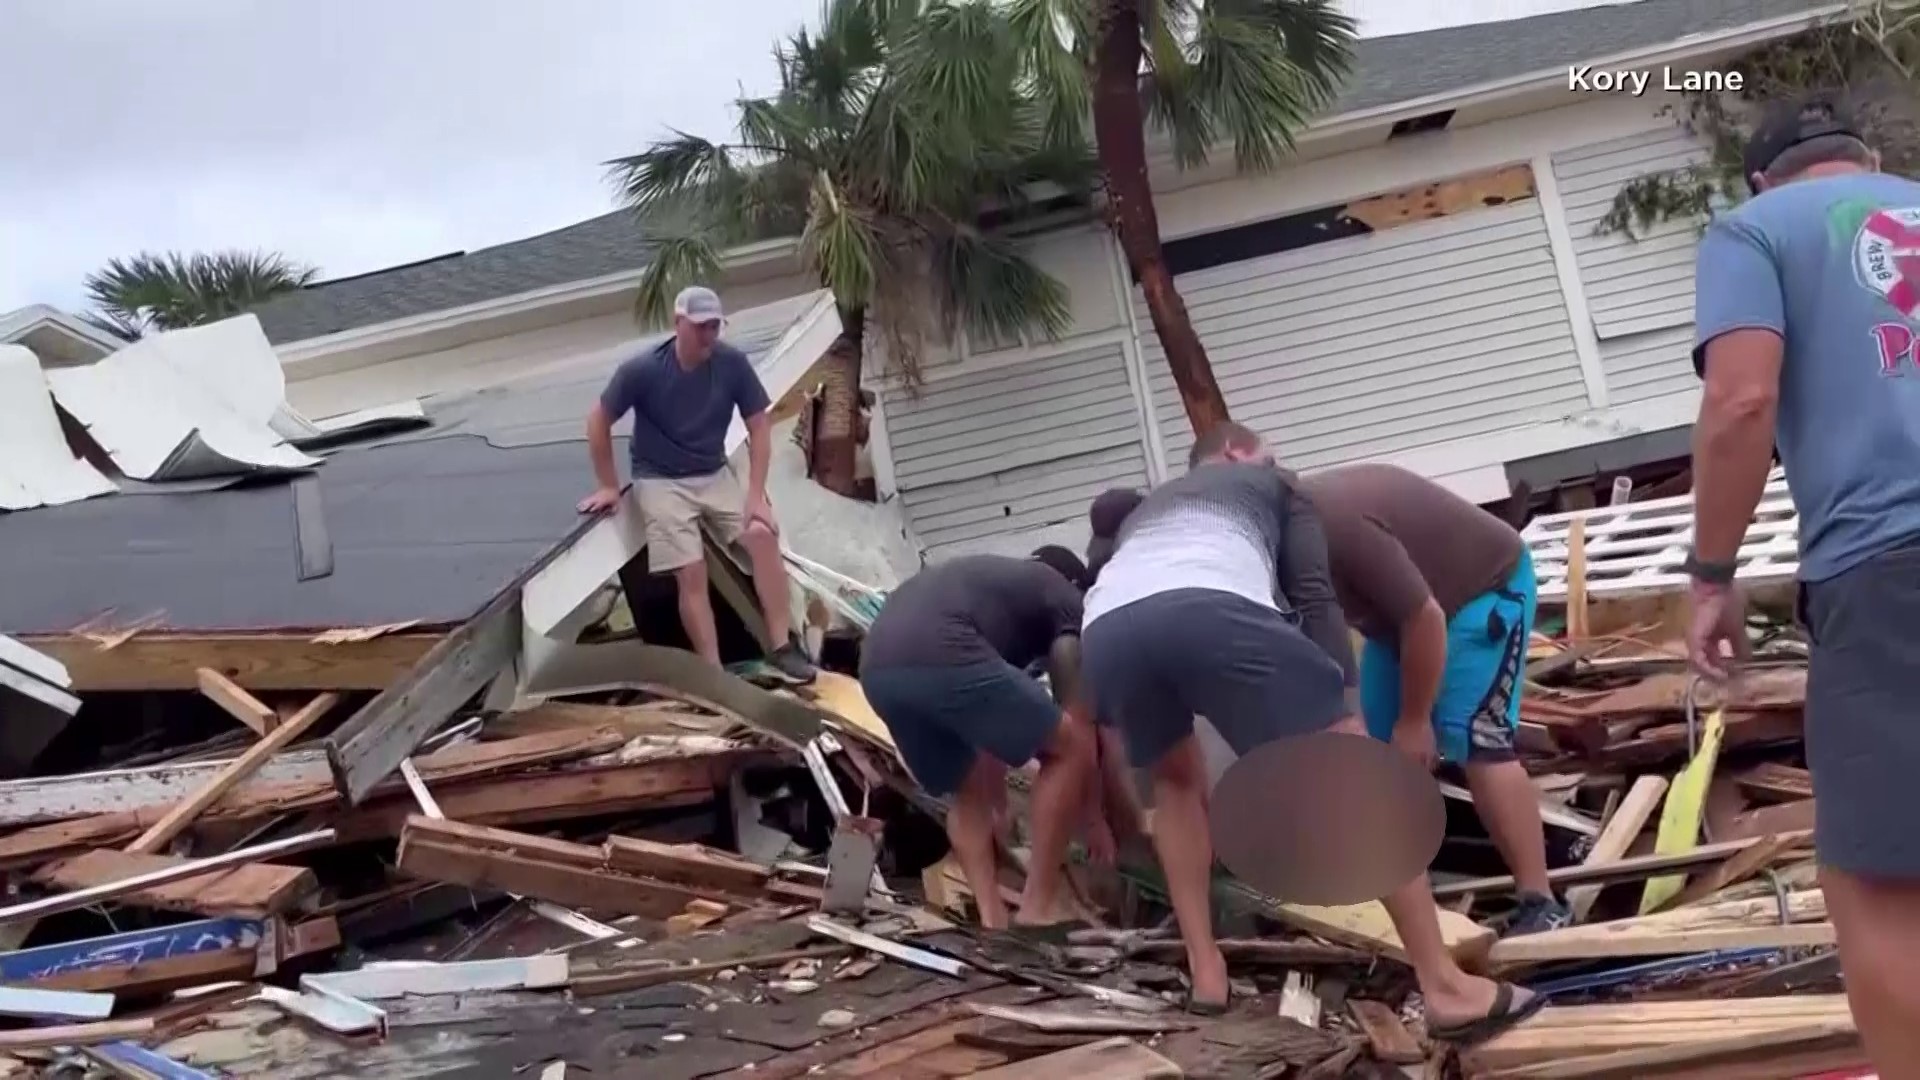 Good Samaritans rescued a man from rubble after Hurricane Ian tore through Fort Myers.